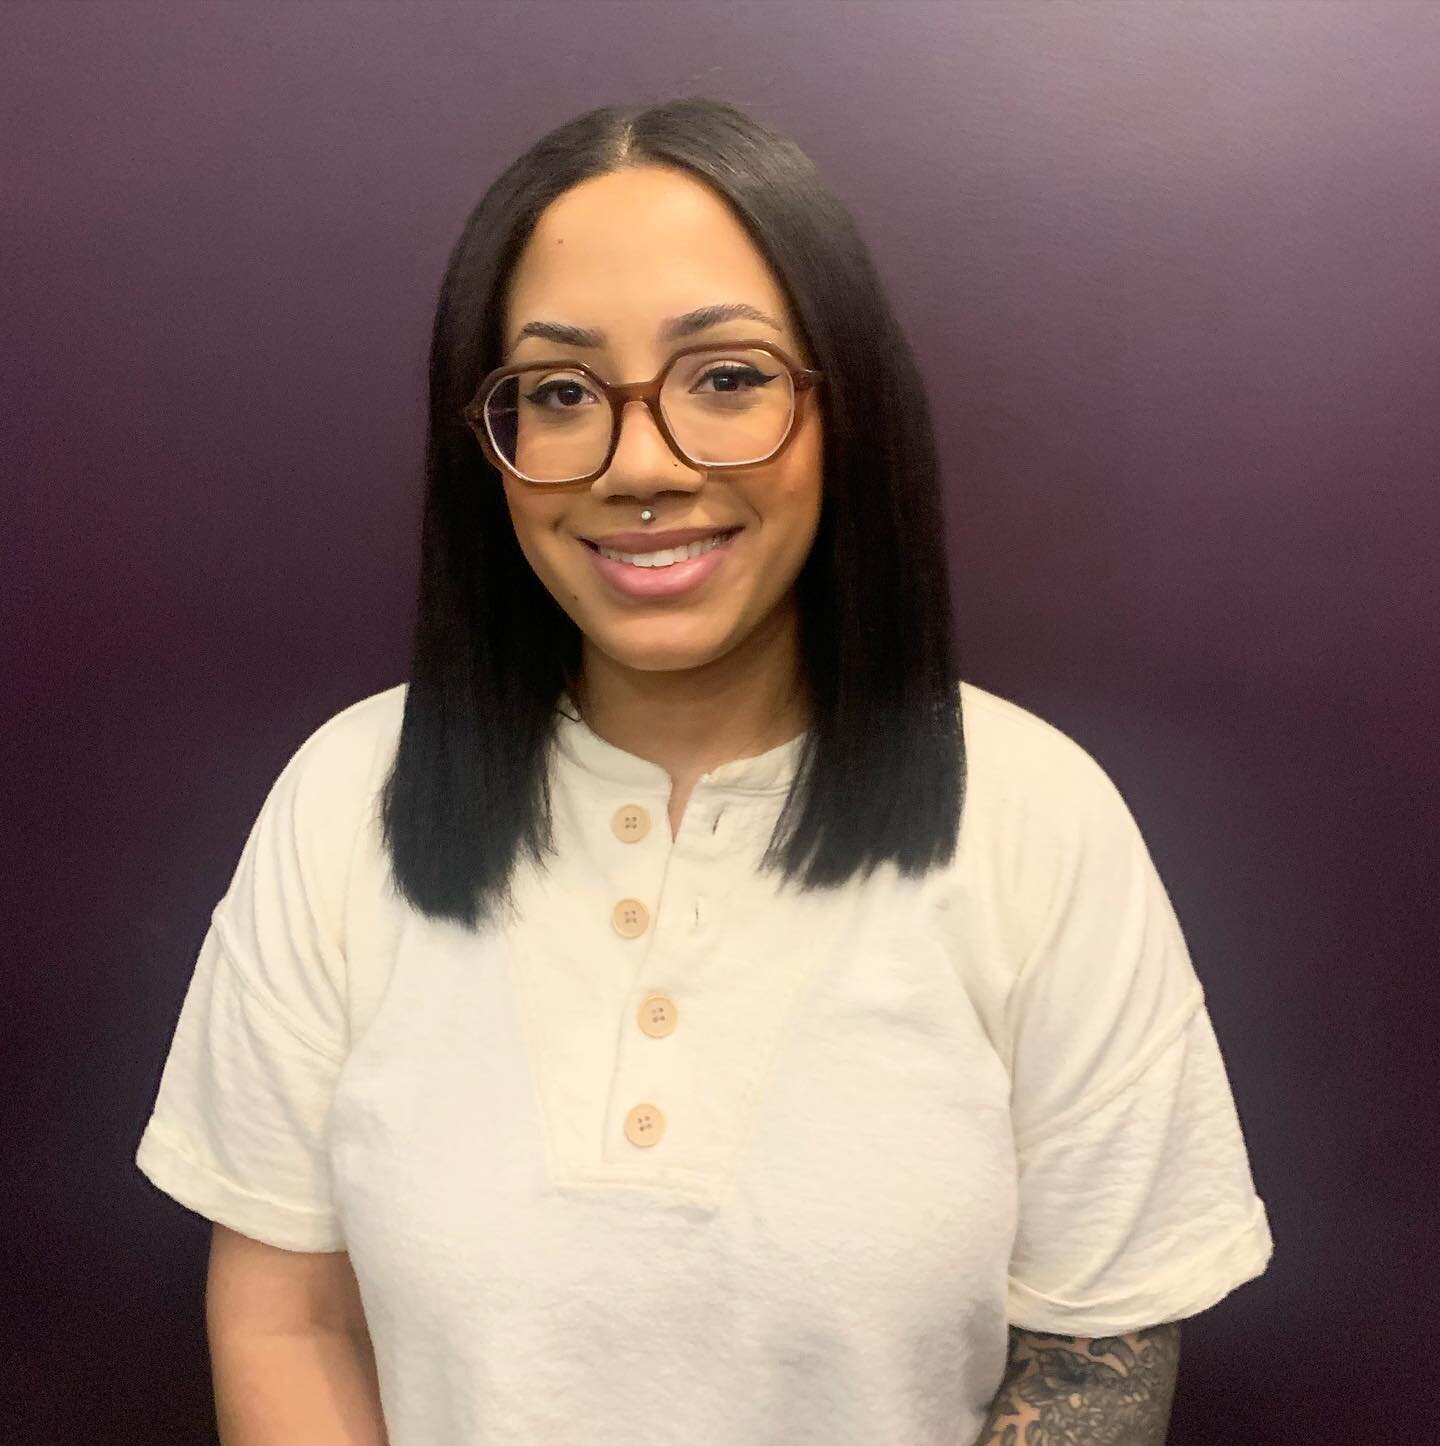 Okok, it&rsquo;s happening! The Baddies crew is expanding! Mason(she/they) is an esthetician specializing in corrective facials, brow services, and body waxing for all. Check out her ig @sunstone_aesthetics. Book with Mason from the link in bio. 
&bu